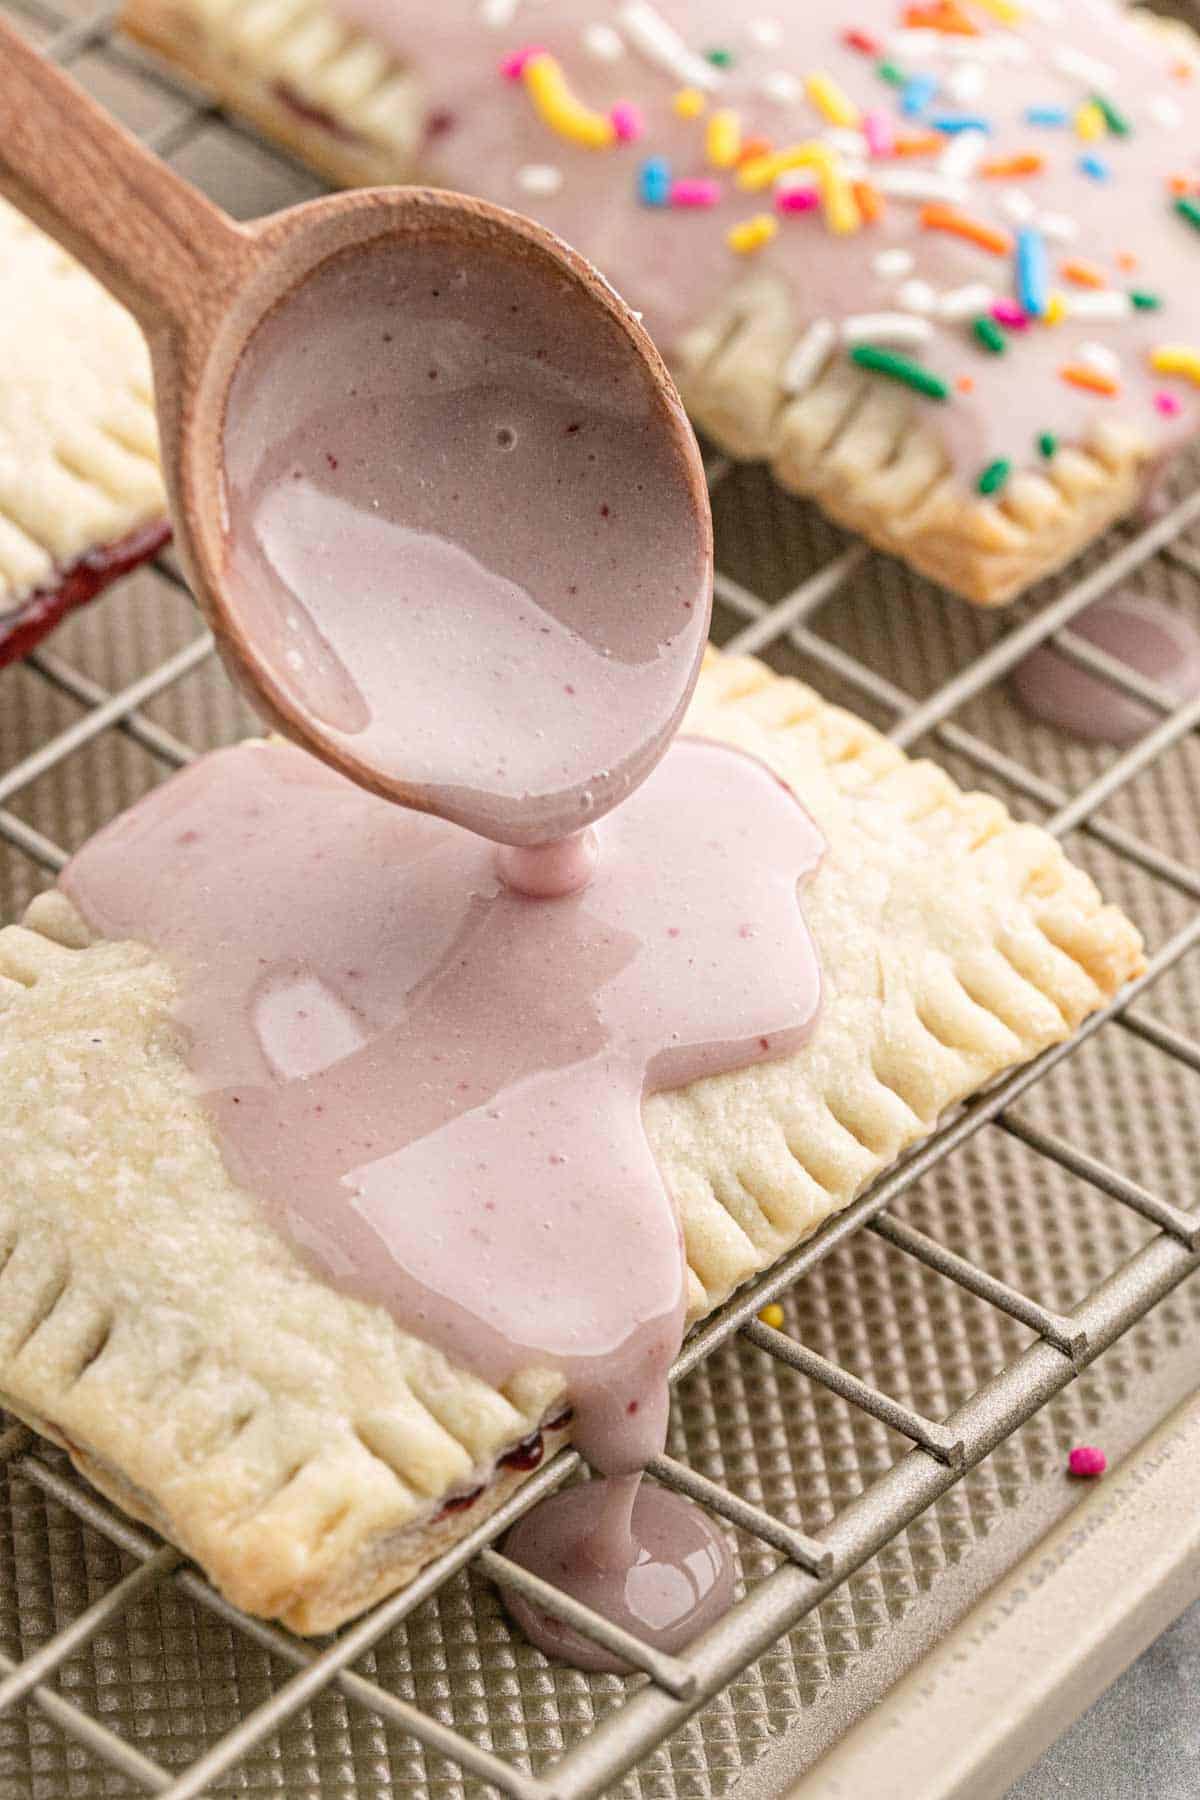 A spoon drizzling the glaze over the pop tarts.